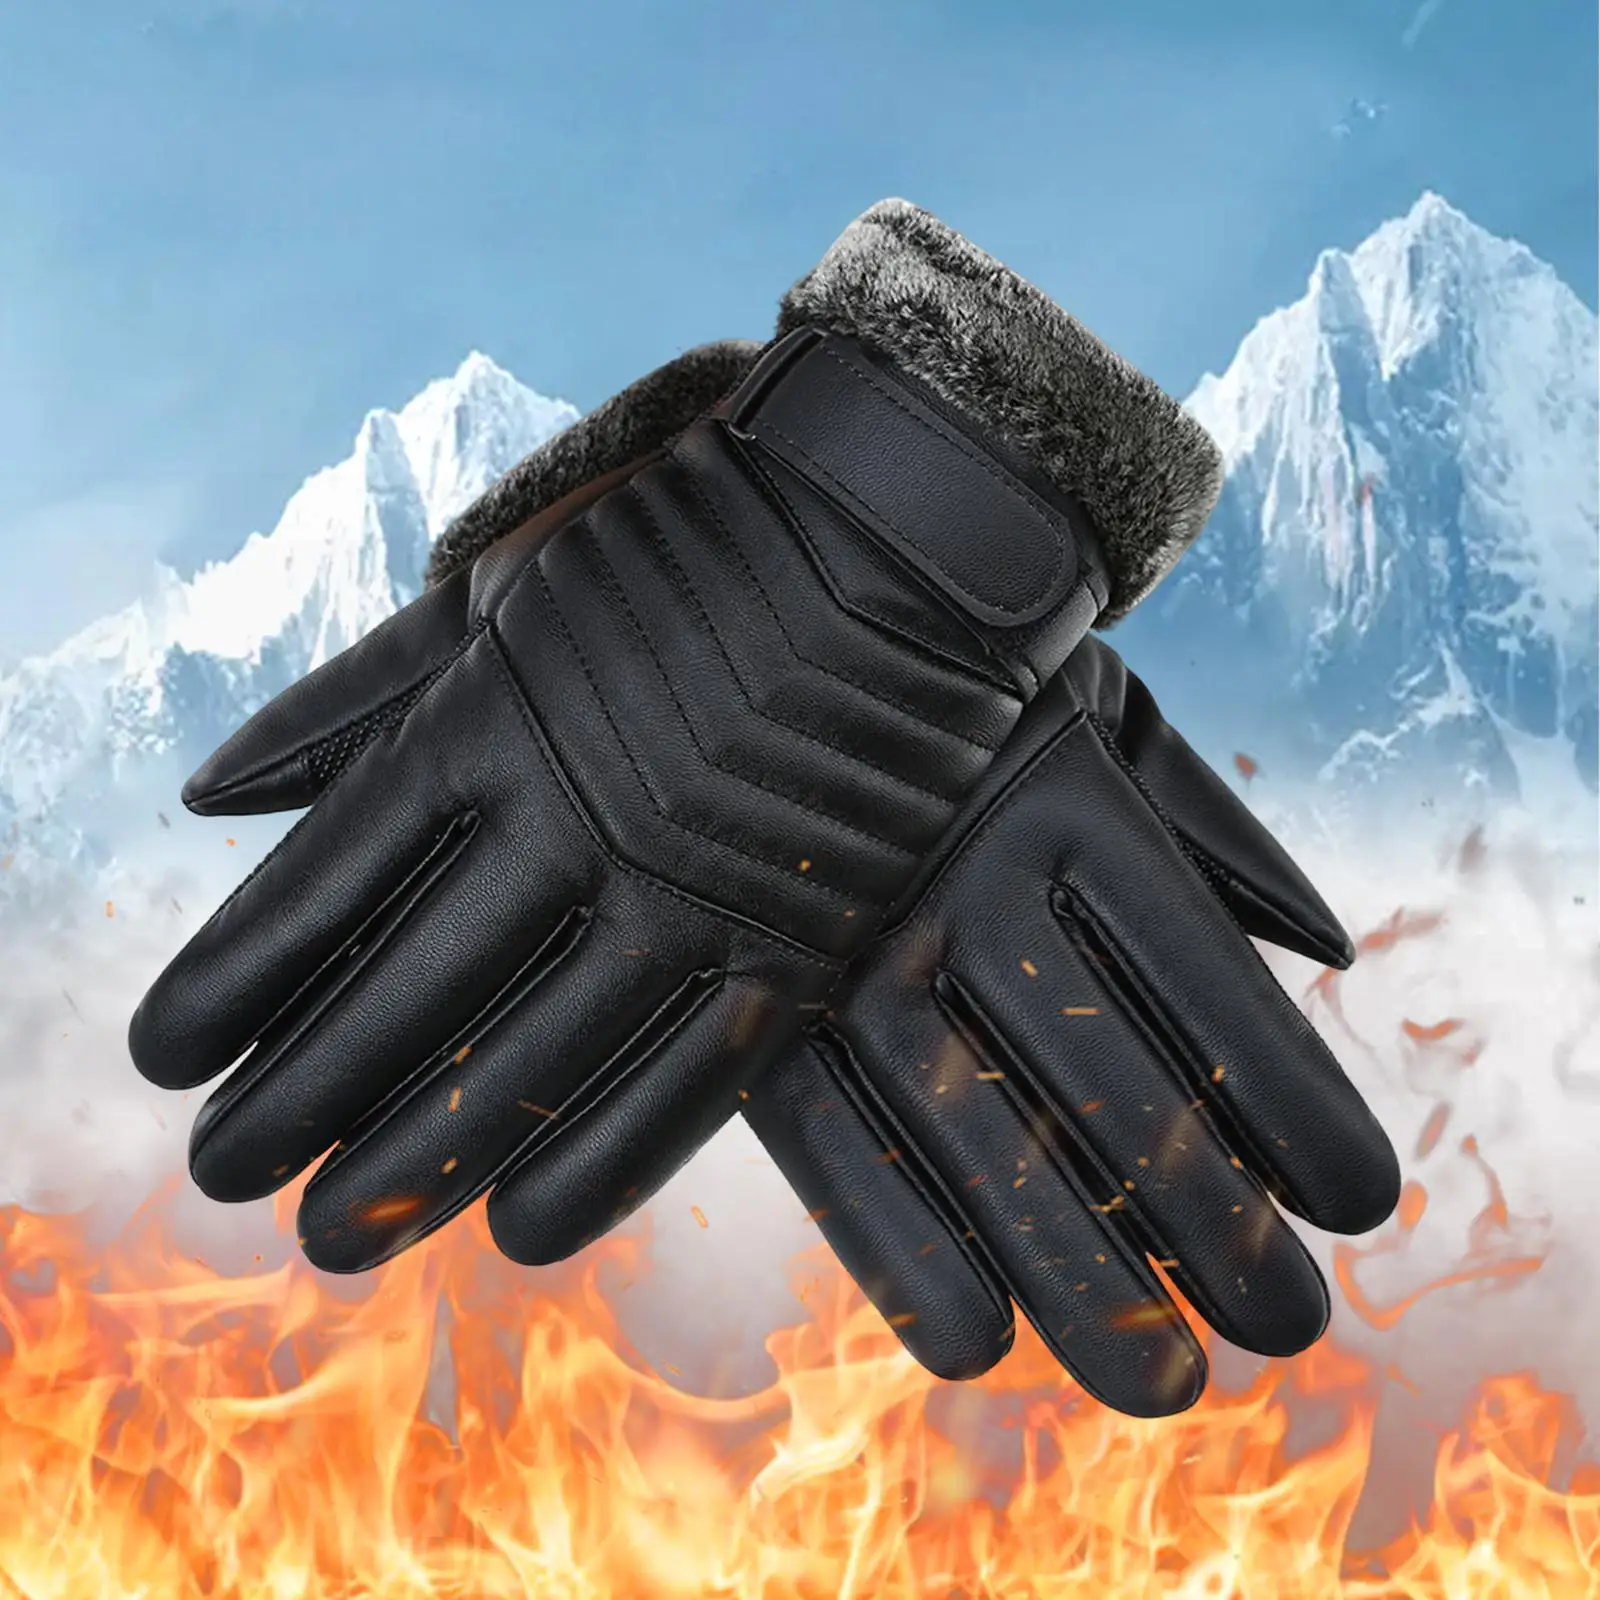 Winter Gloves Touchscreen Comfortable Durable Weather Resistant Thermal Gloves